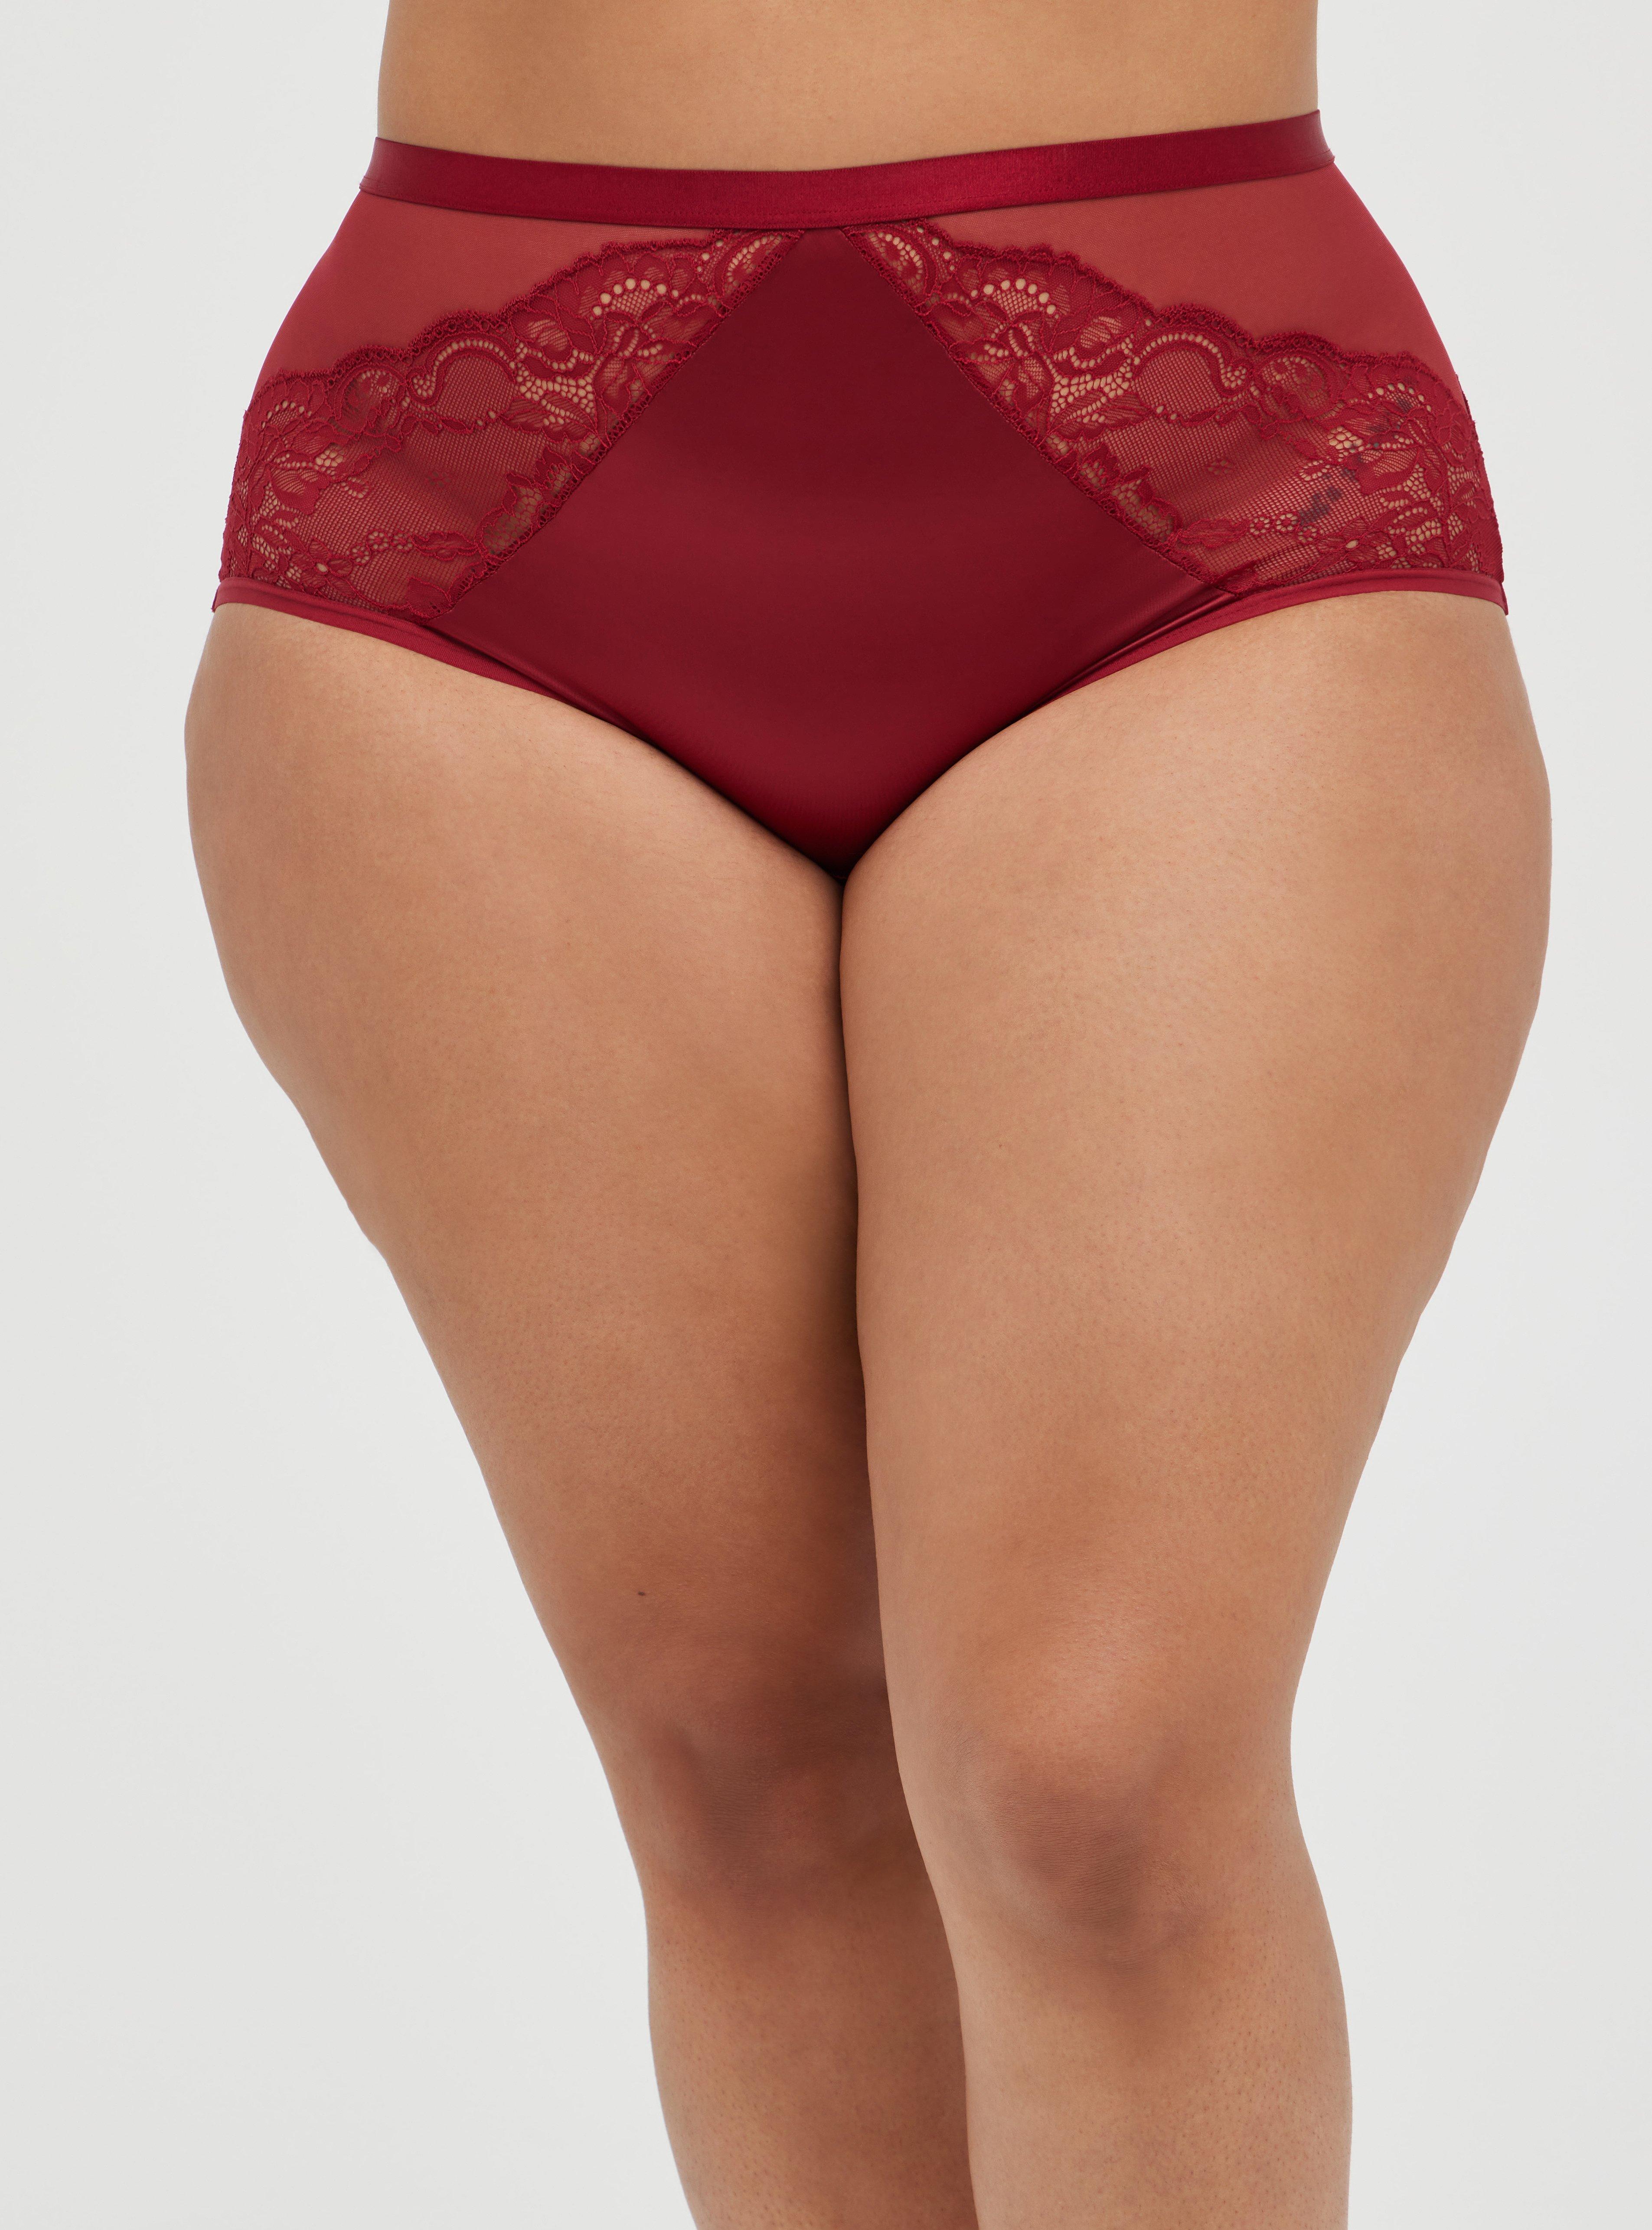 Smart & Sexy Women's Lace High-Waisted Cheeky Panty, Style-SA905